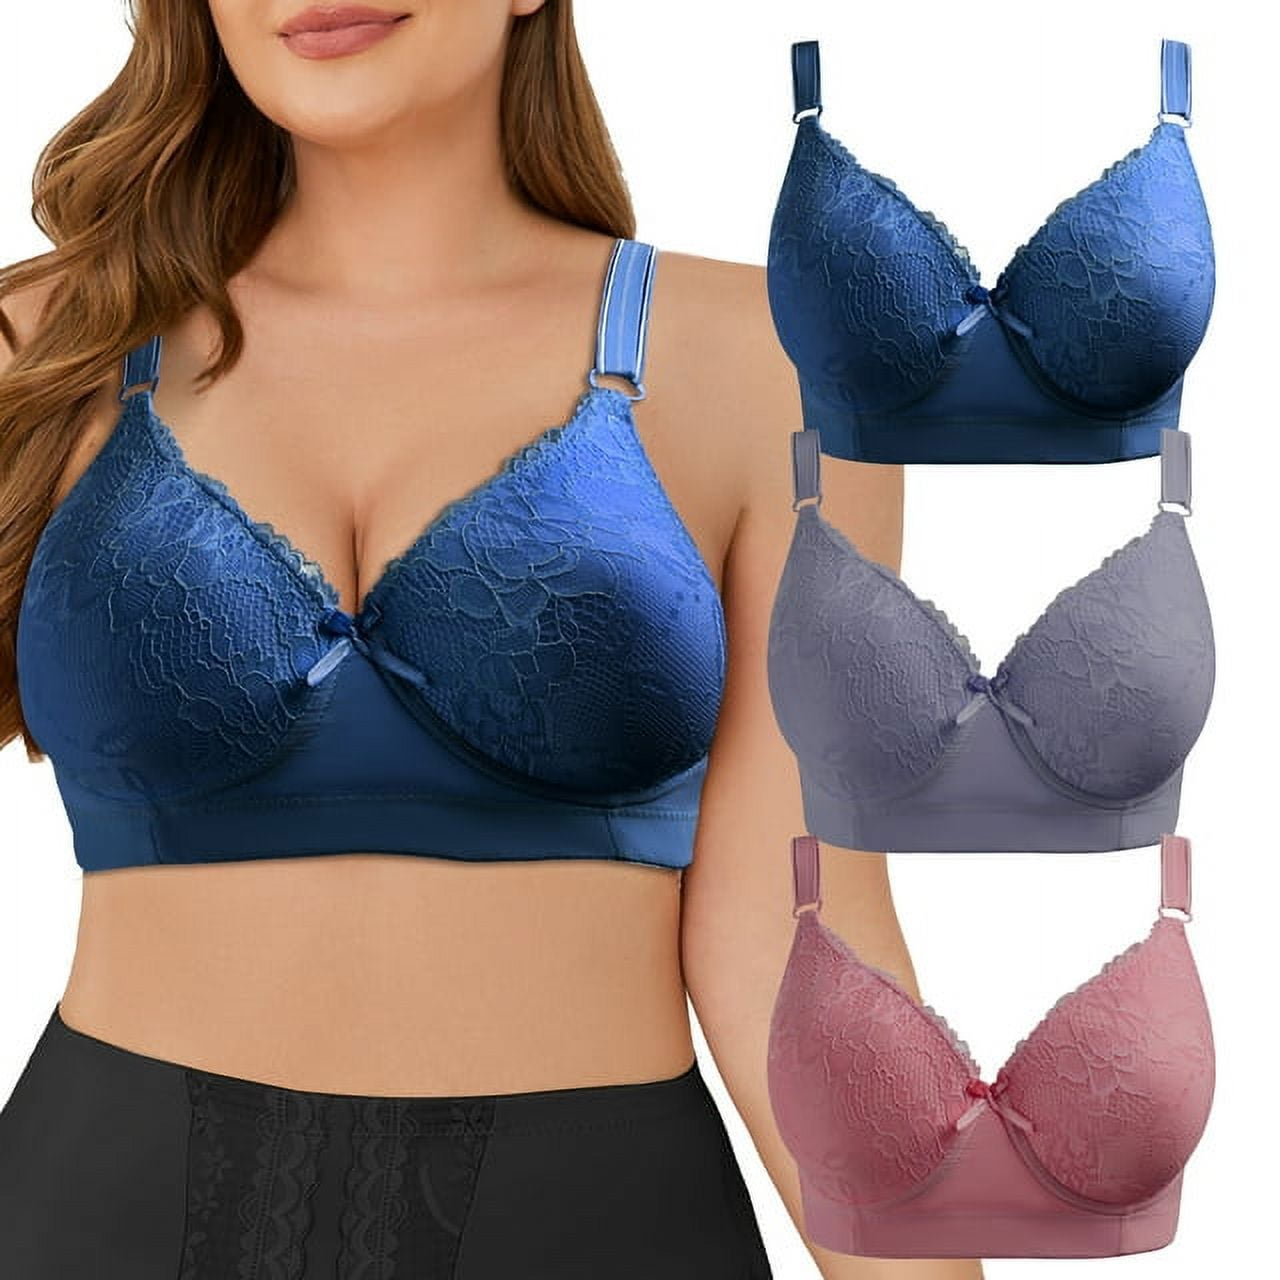 Victoria's Secret PINK - Wear Everywhere Wireless Push-Up Bras are super  comfy with fully adjustable straps. Score them for 2/$52 in stores +  online!